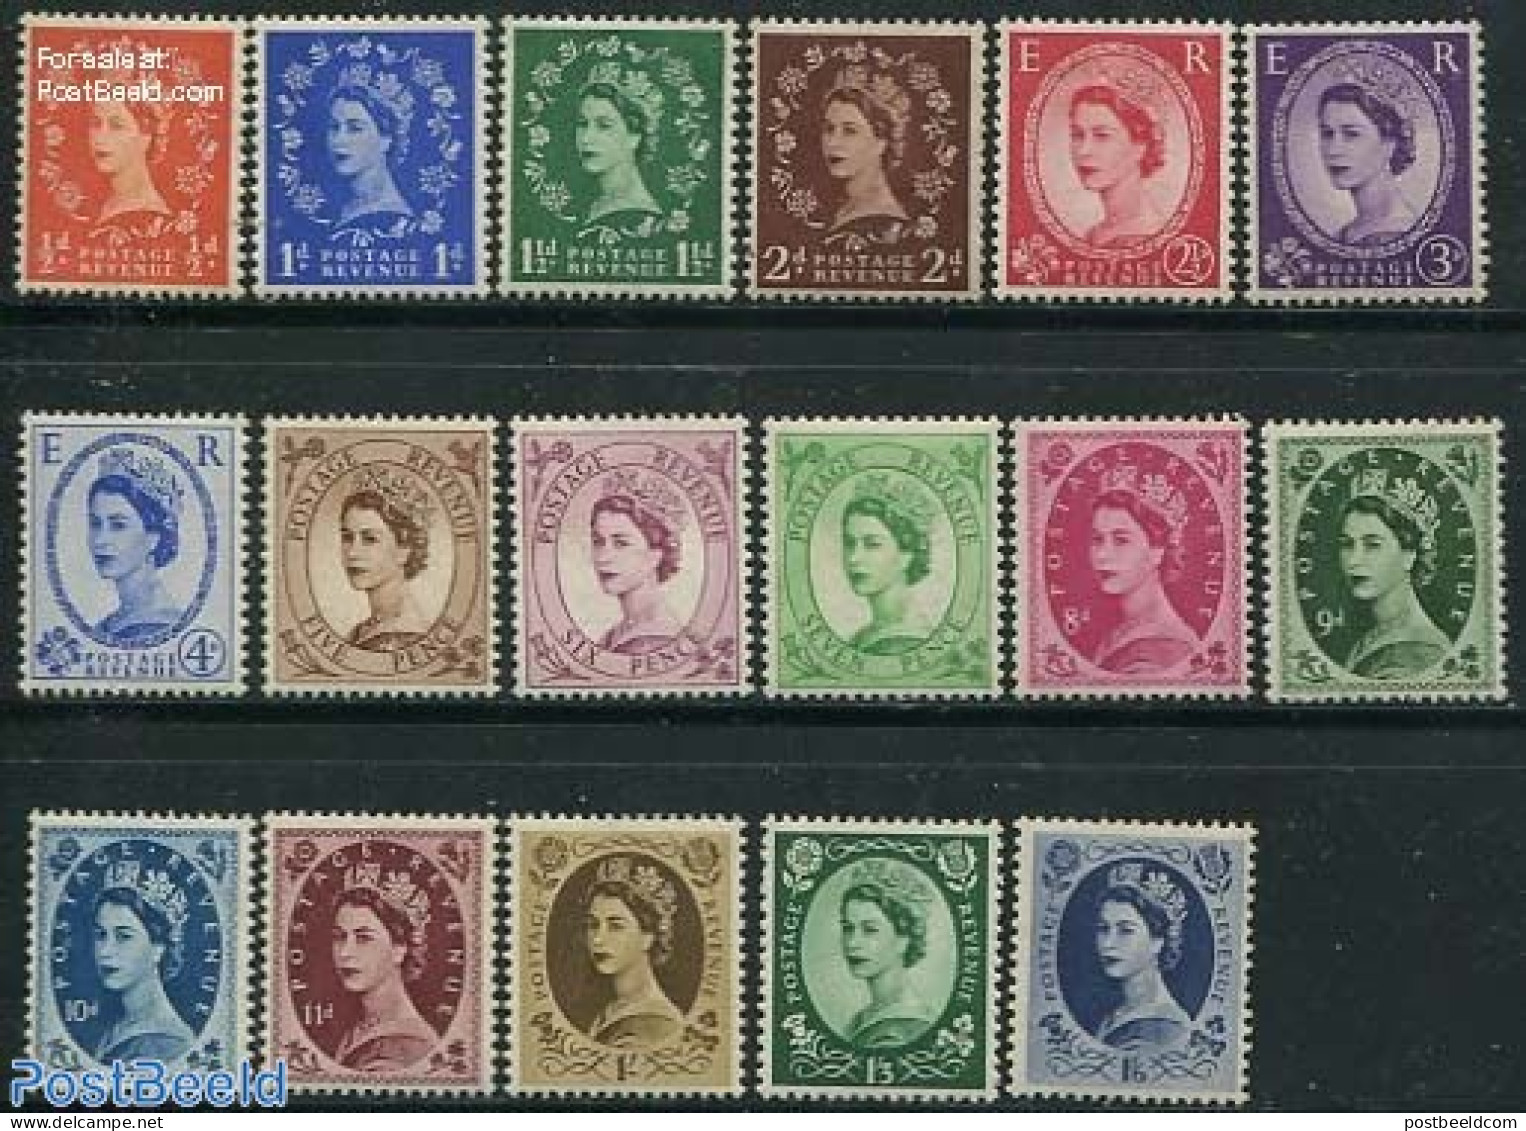 Great Britain 1952 Definitives 17v (WM ER With Round Top Crown), Mint NH - Nuovi